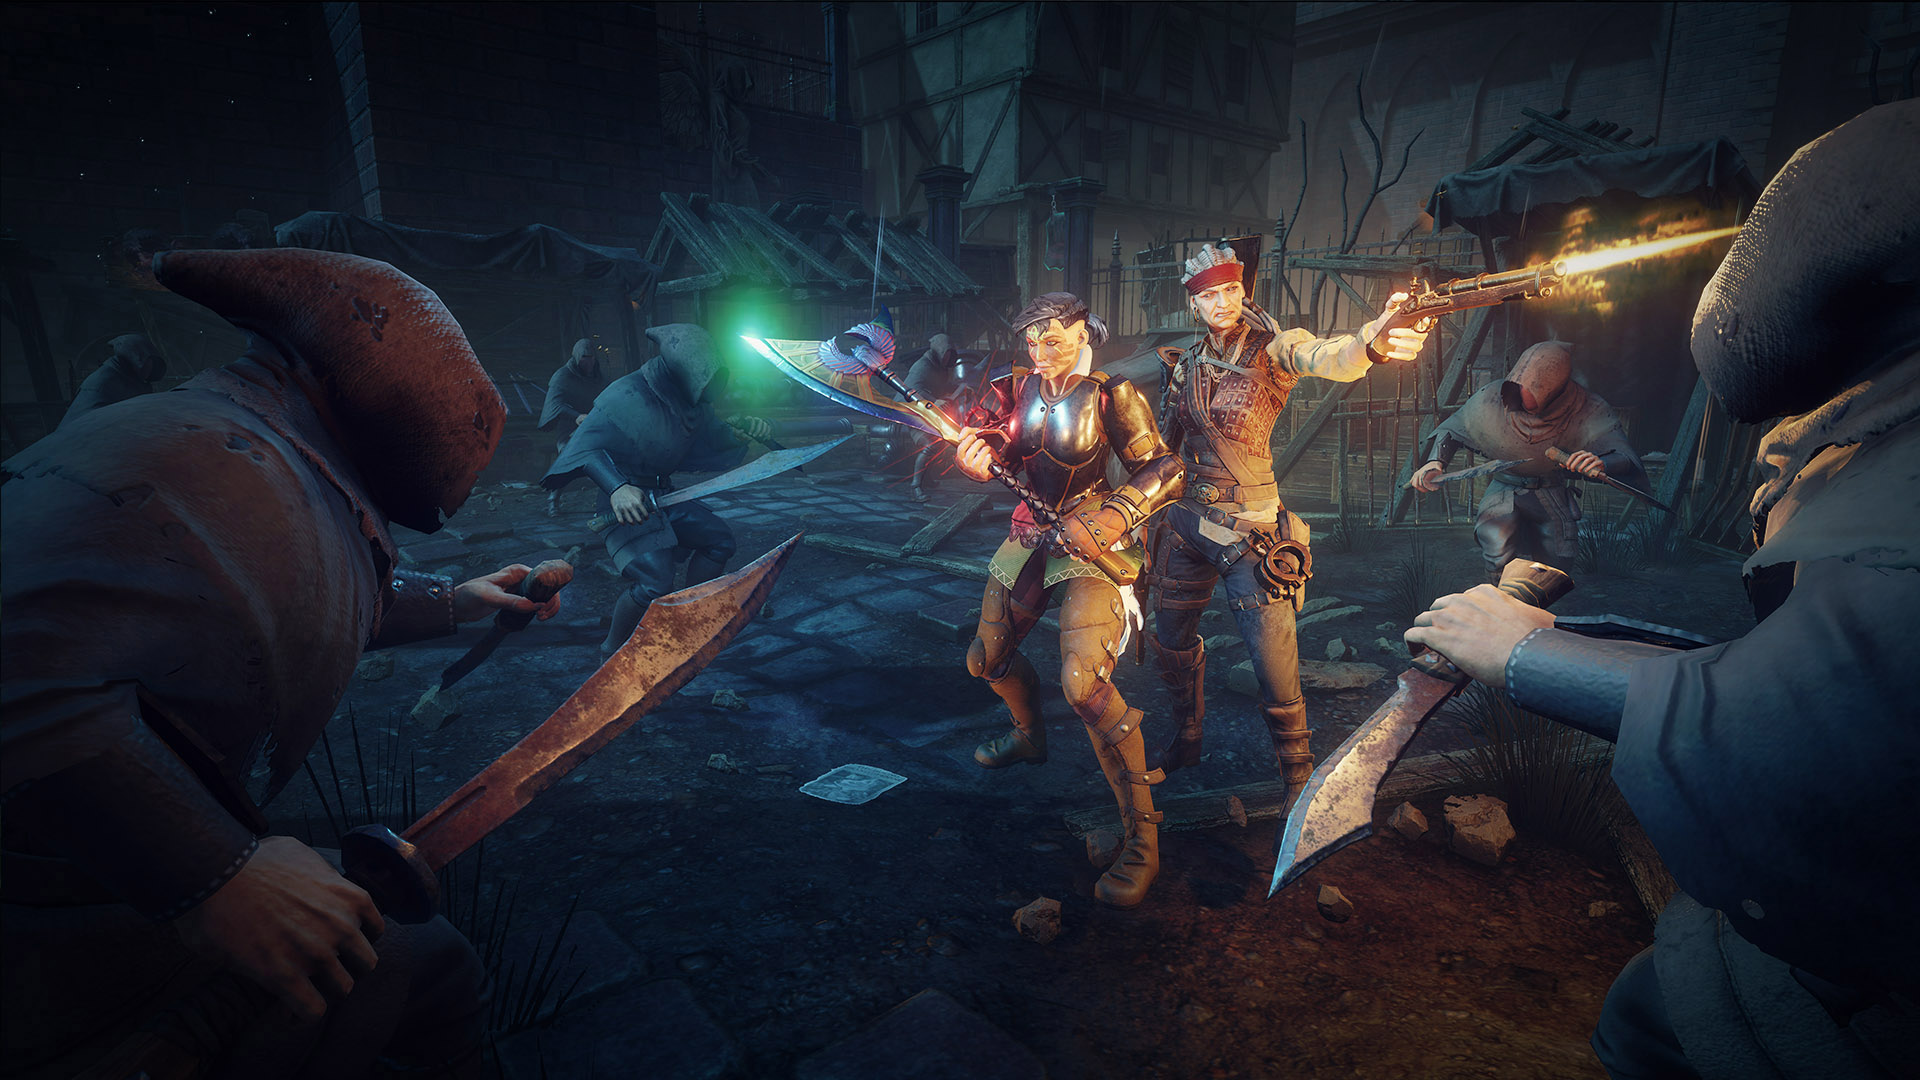 Hand of Fate 2 - A Cold Hearth Featured Screenshot #1